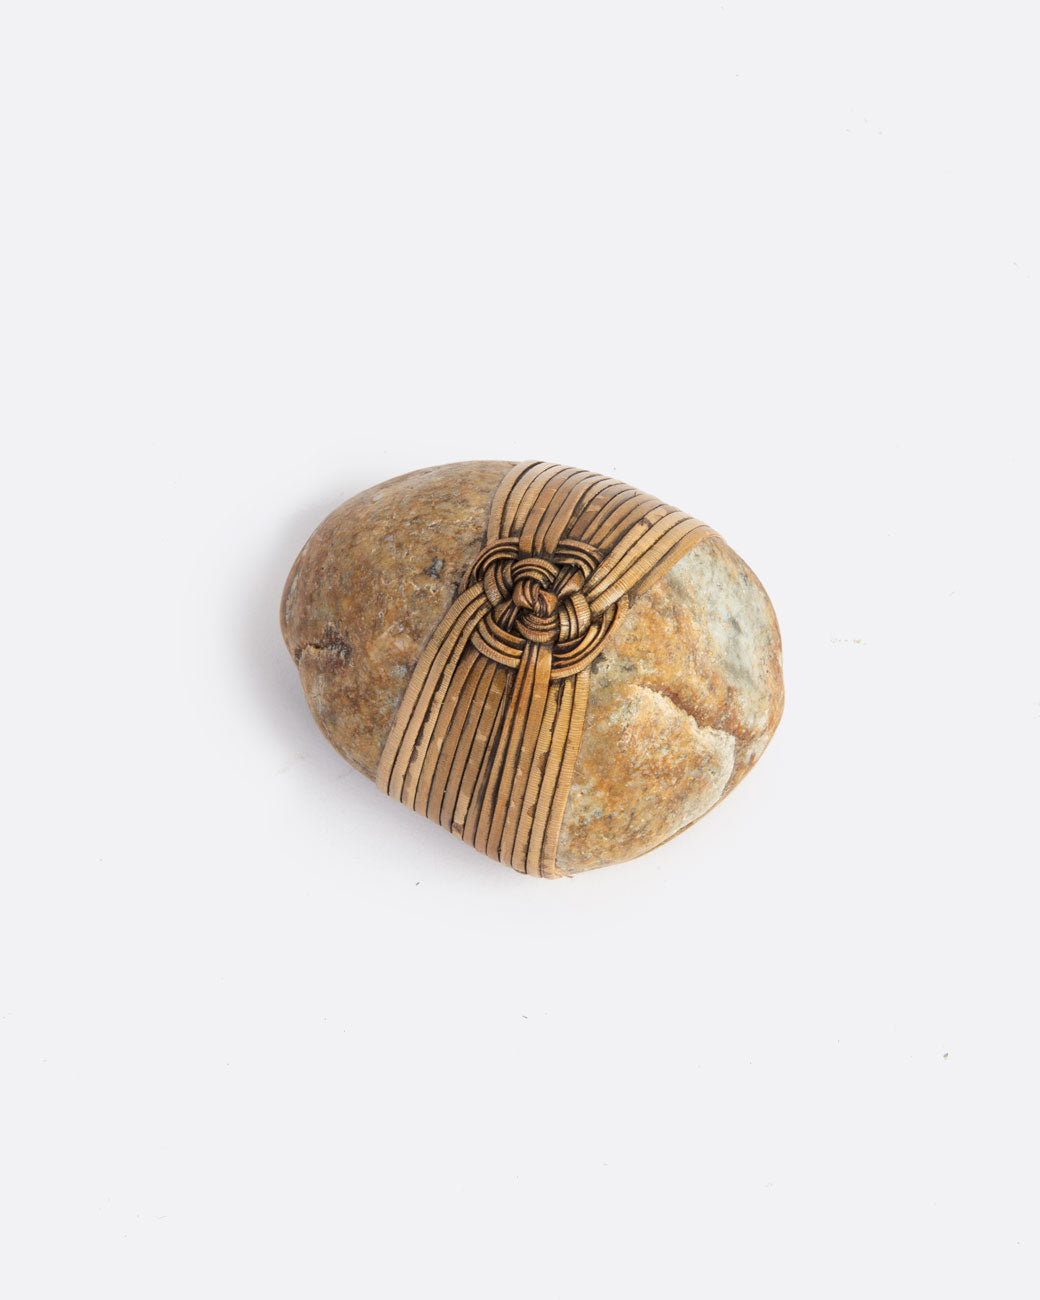 birds eye view image of a blessing stone, wrapped in a woven grass. 